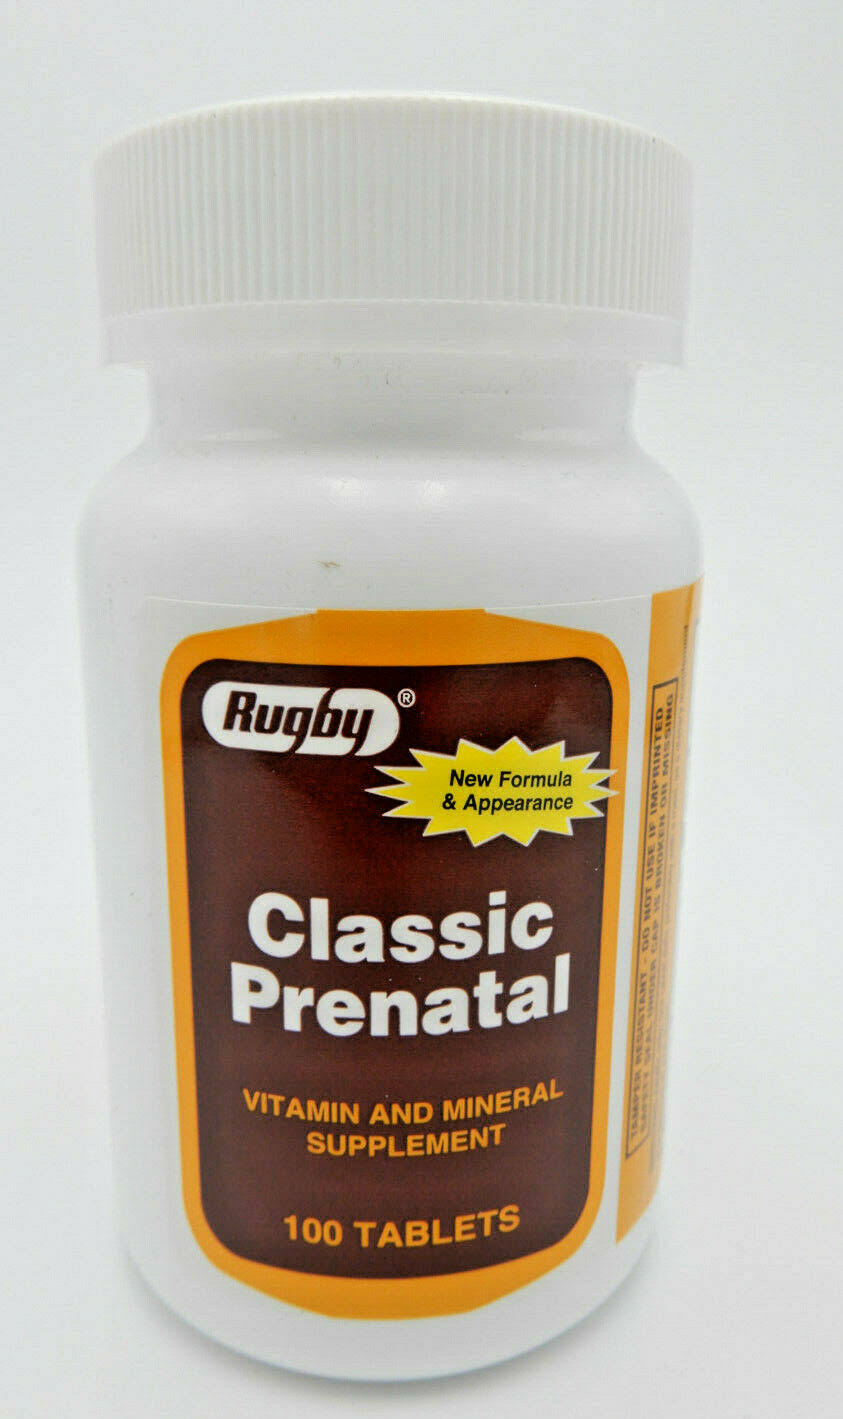 Rugby Classic Prenatal Vitamins Supplement - 100 Tablets